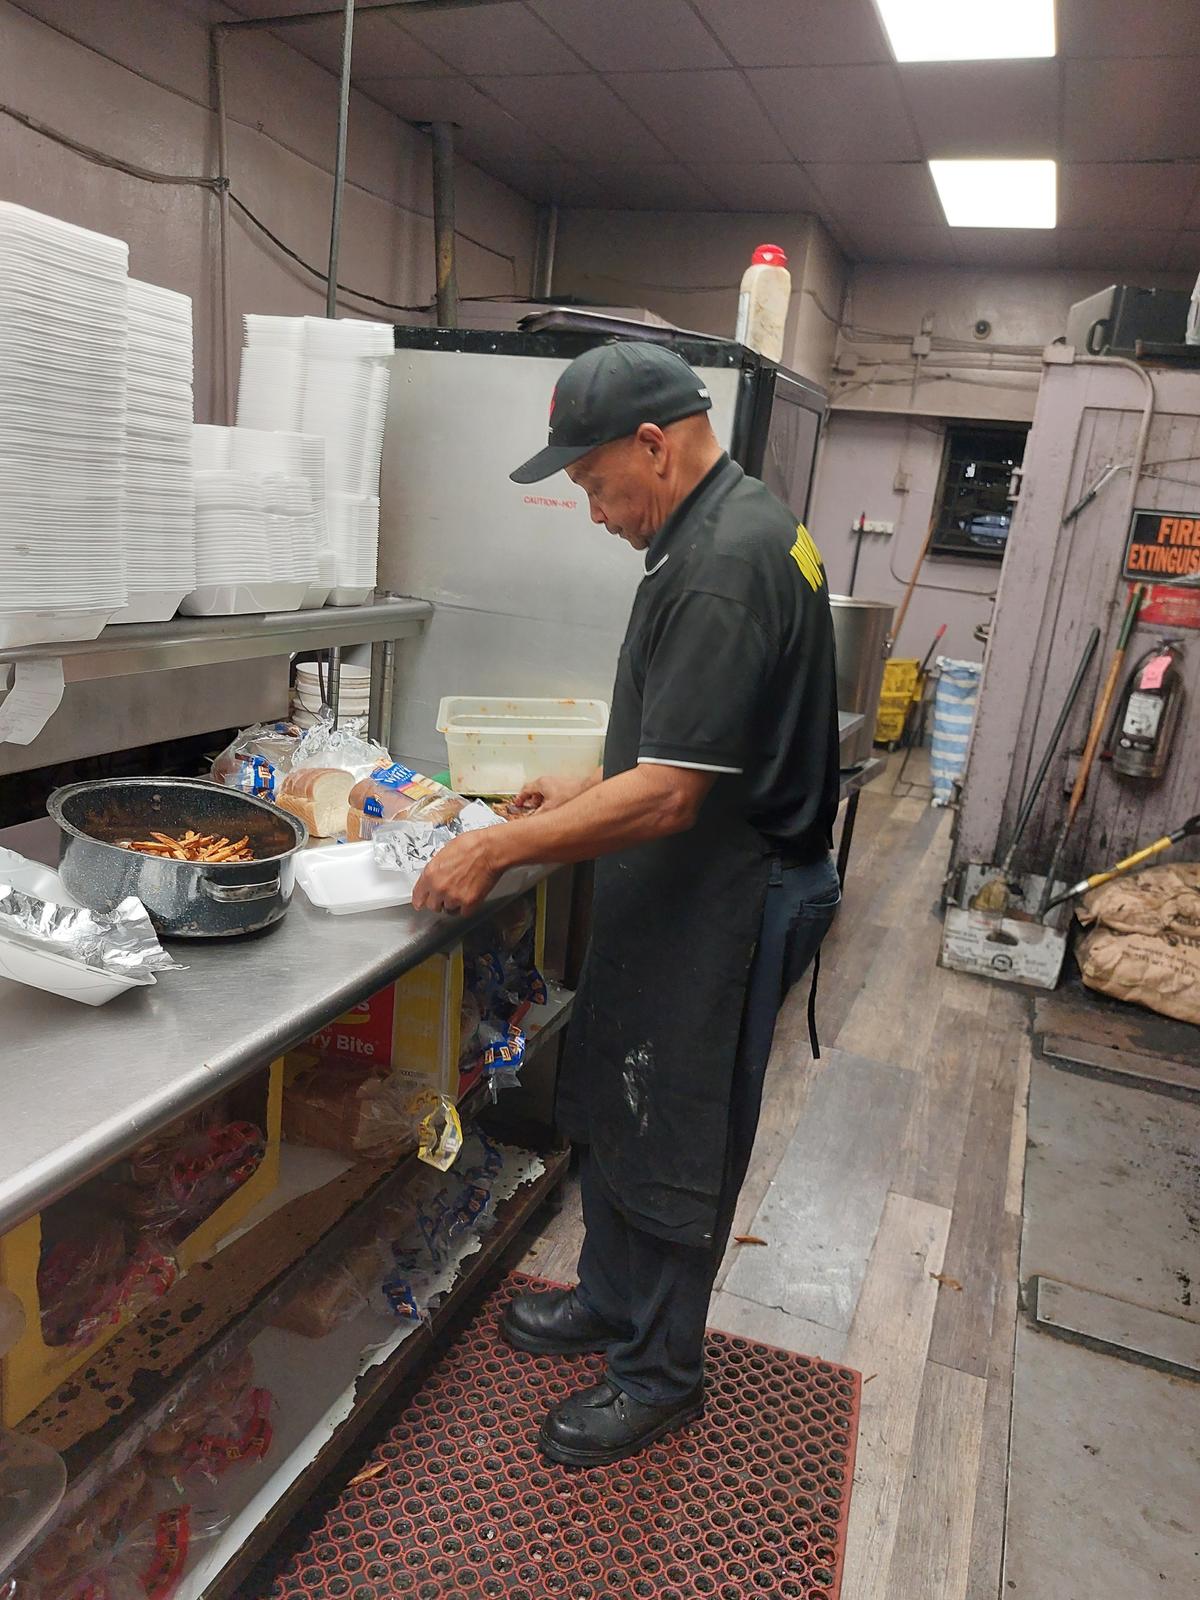 Mr. Vance Whitmore has been working in the Whitmore's Bar-B-Q kitchen for 50 years, since he was a teenager. (Kevin Revolinski)